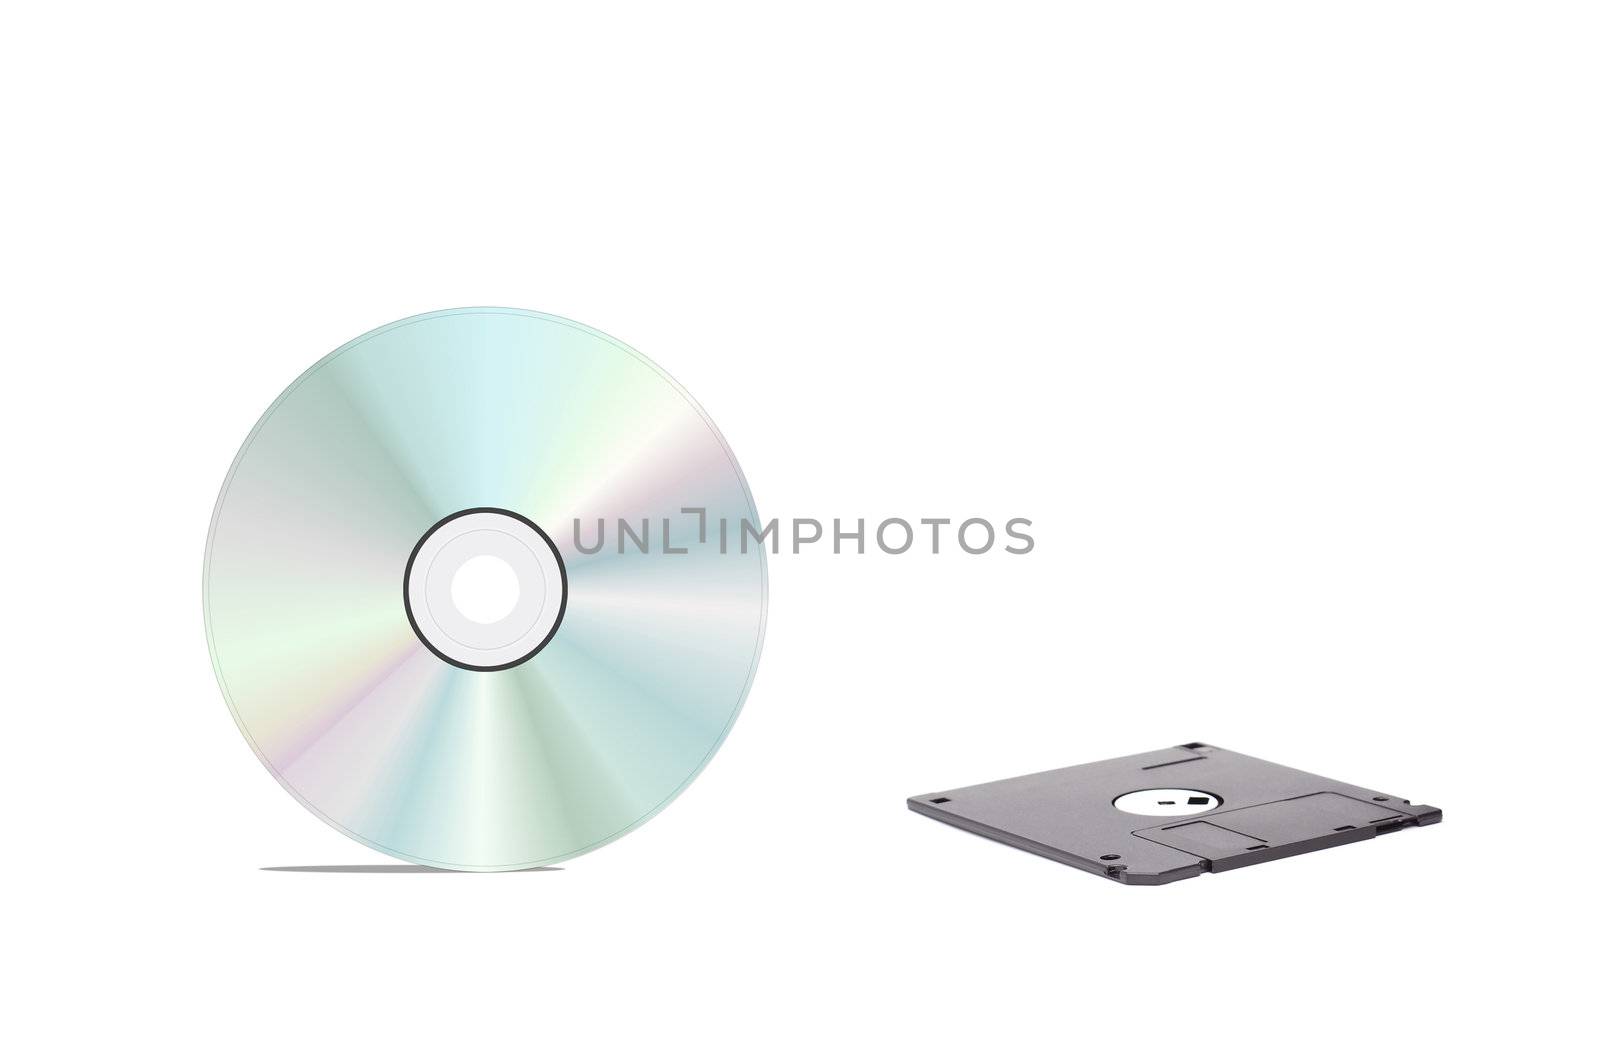 floppy disk and cd